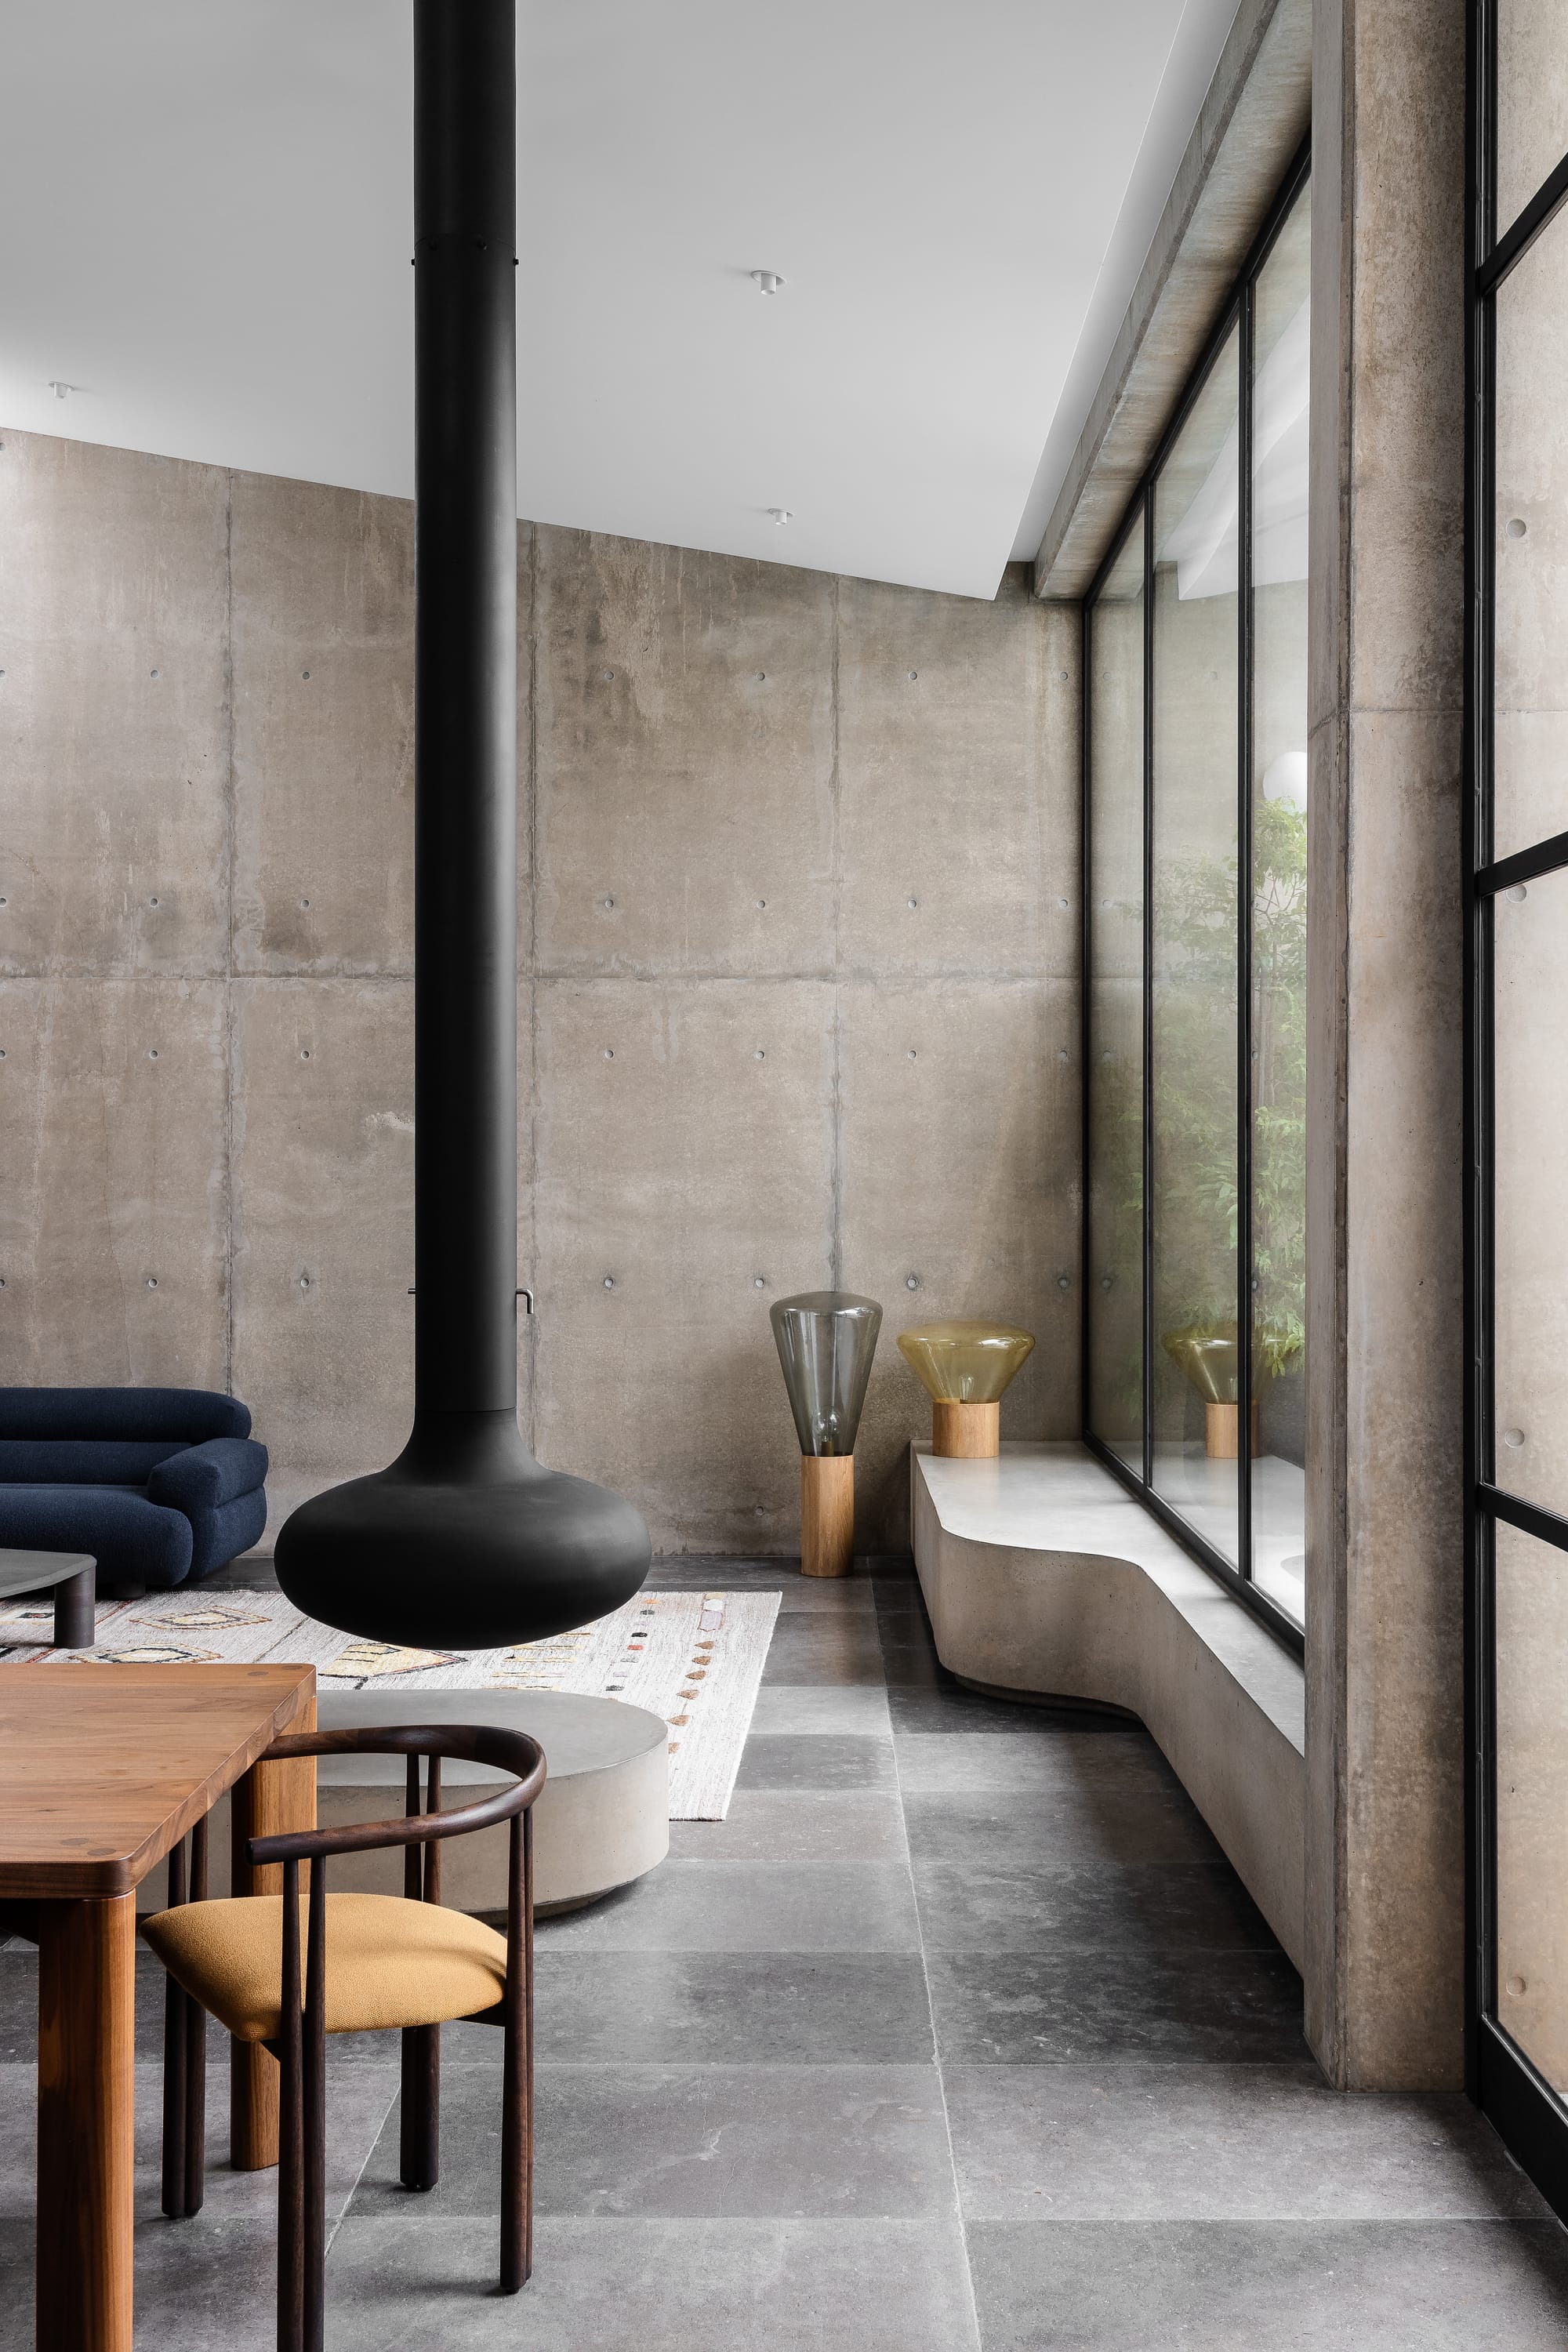 Rose Park by studio gram. Photography by Timothy Ross. Interior living space with tiled floors, concrete walls and black curved fireplace suspended from ceiling. Concrete bench runs along window. 